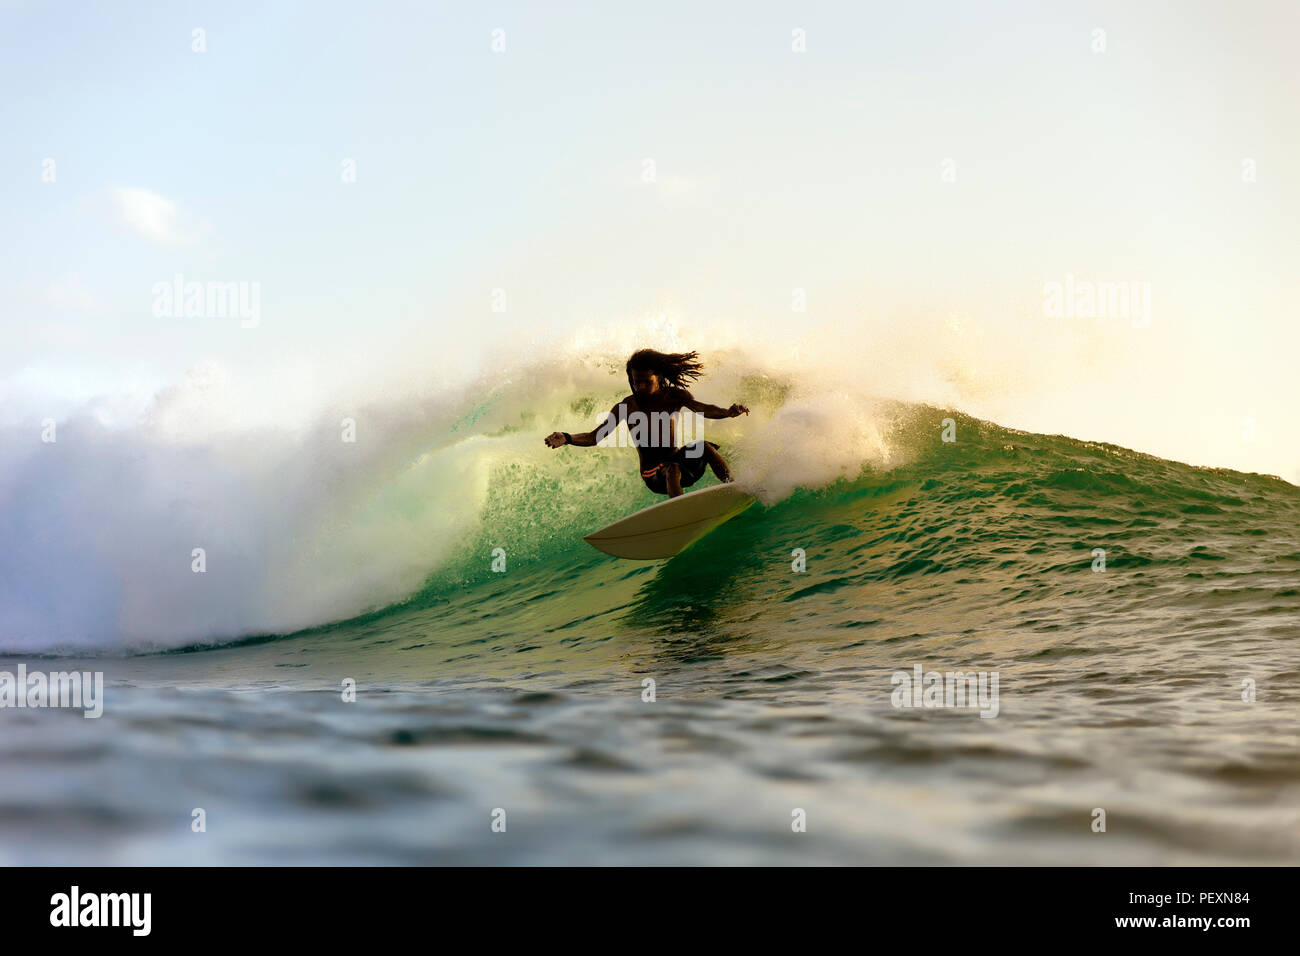 Surfer riding wave in sea Stock Photo